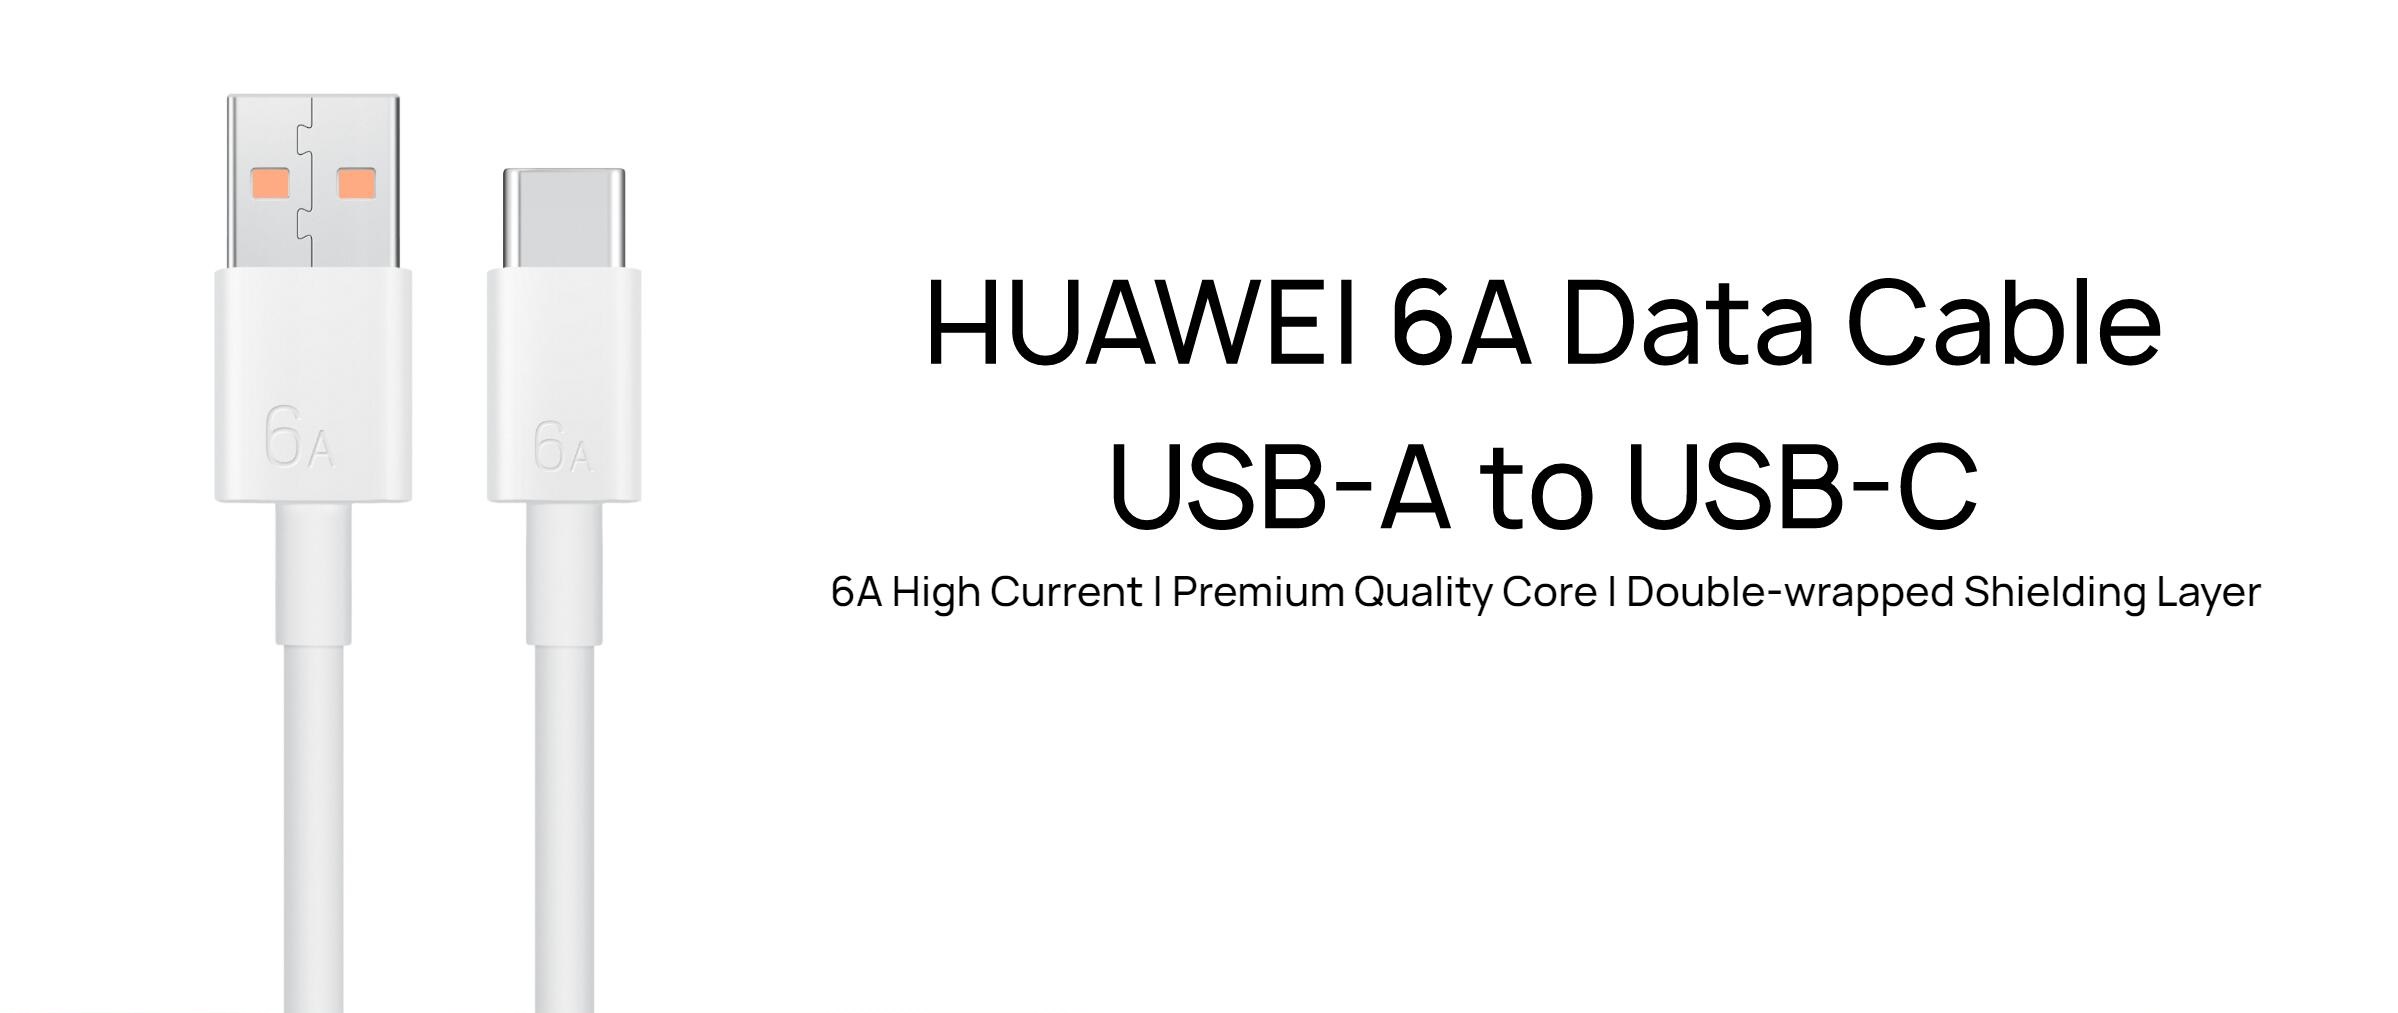 HUAWEI 6A Data Cable USB-A to USB-C - HUAWEI Global